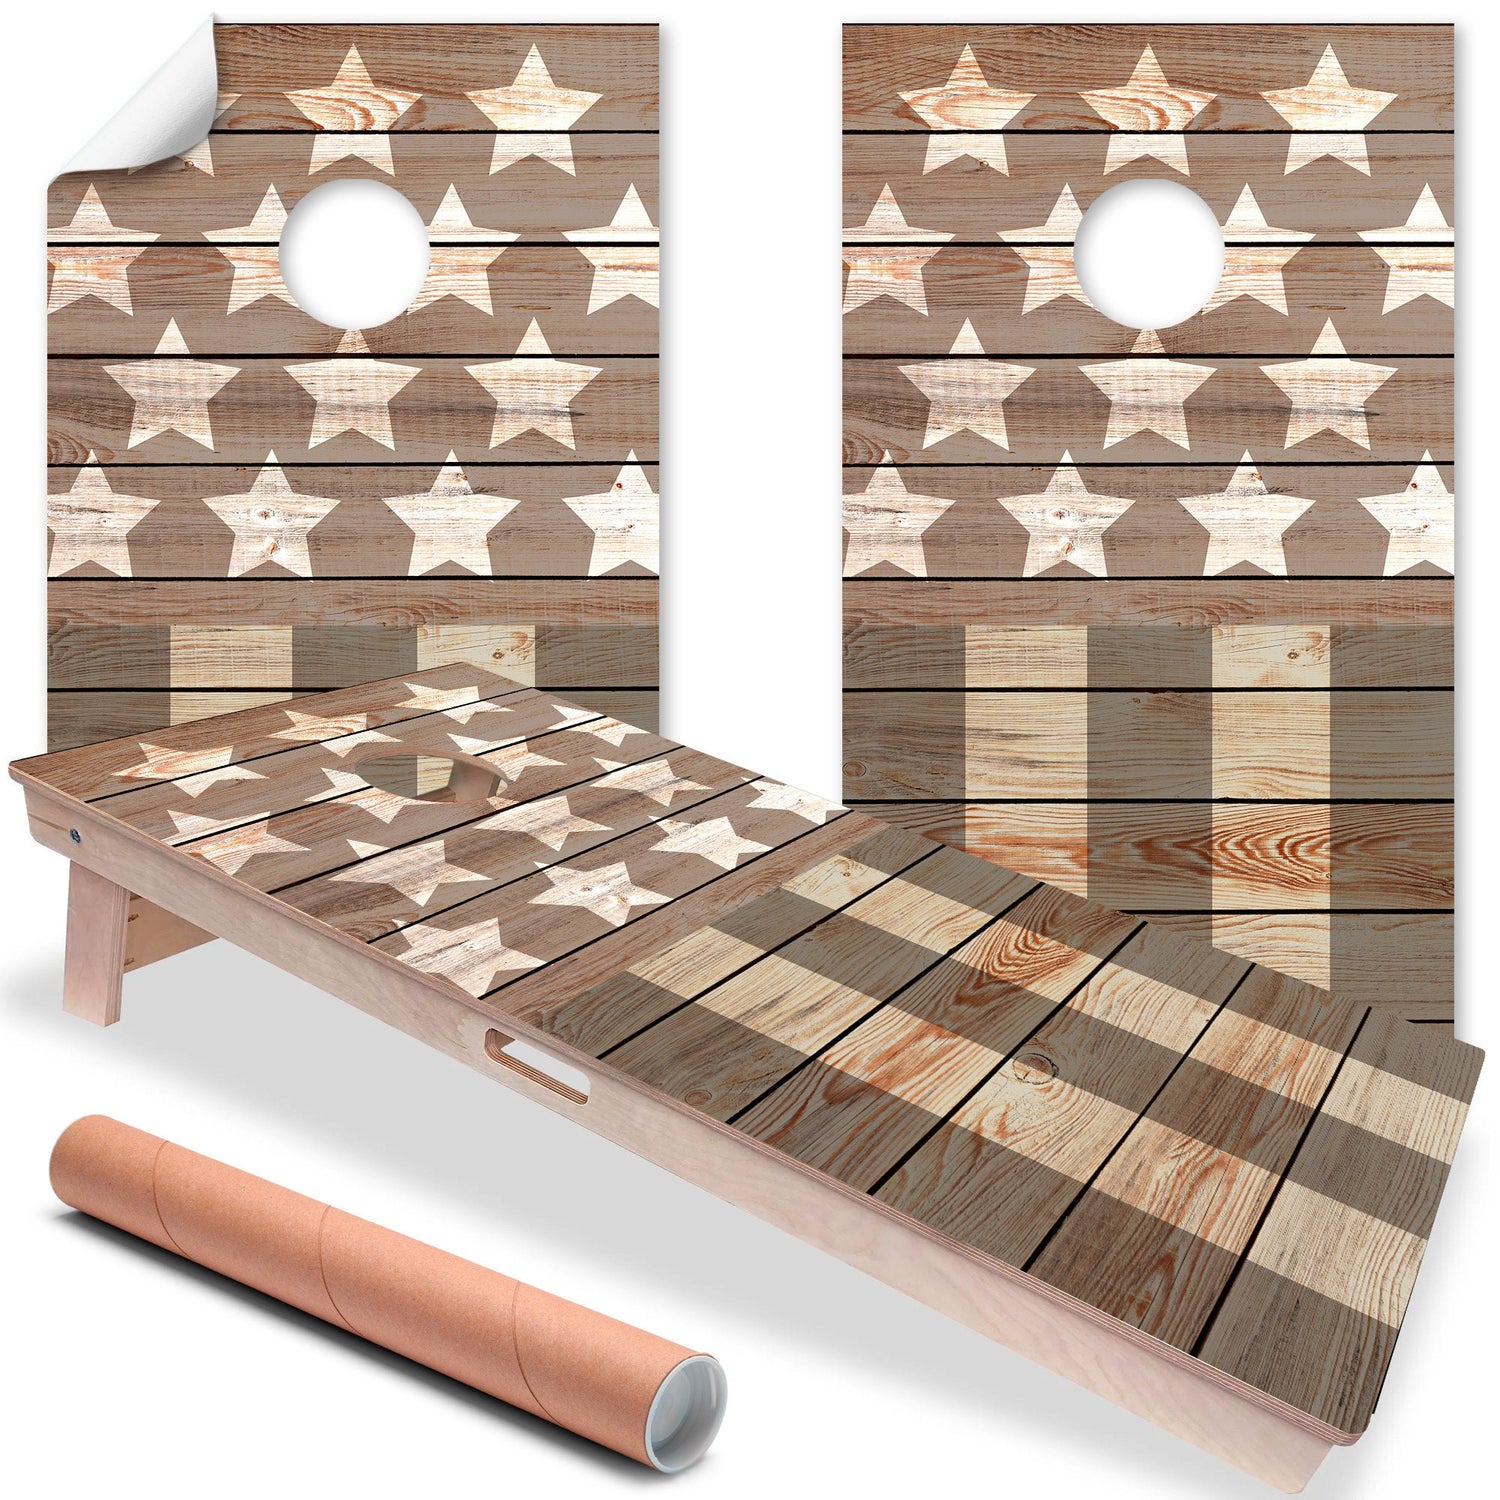 Set of 2 Cornhole Wraps for Board Vinyl Decals - Bean Bag Toss Wrap Stickers Skins Board Not Included Brown Stars & Stripes American Flag